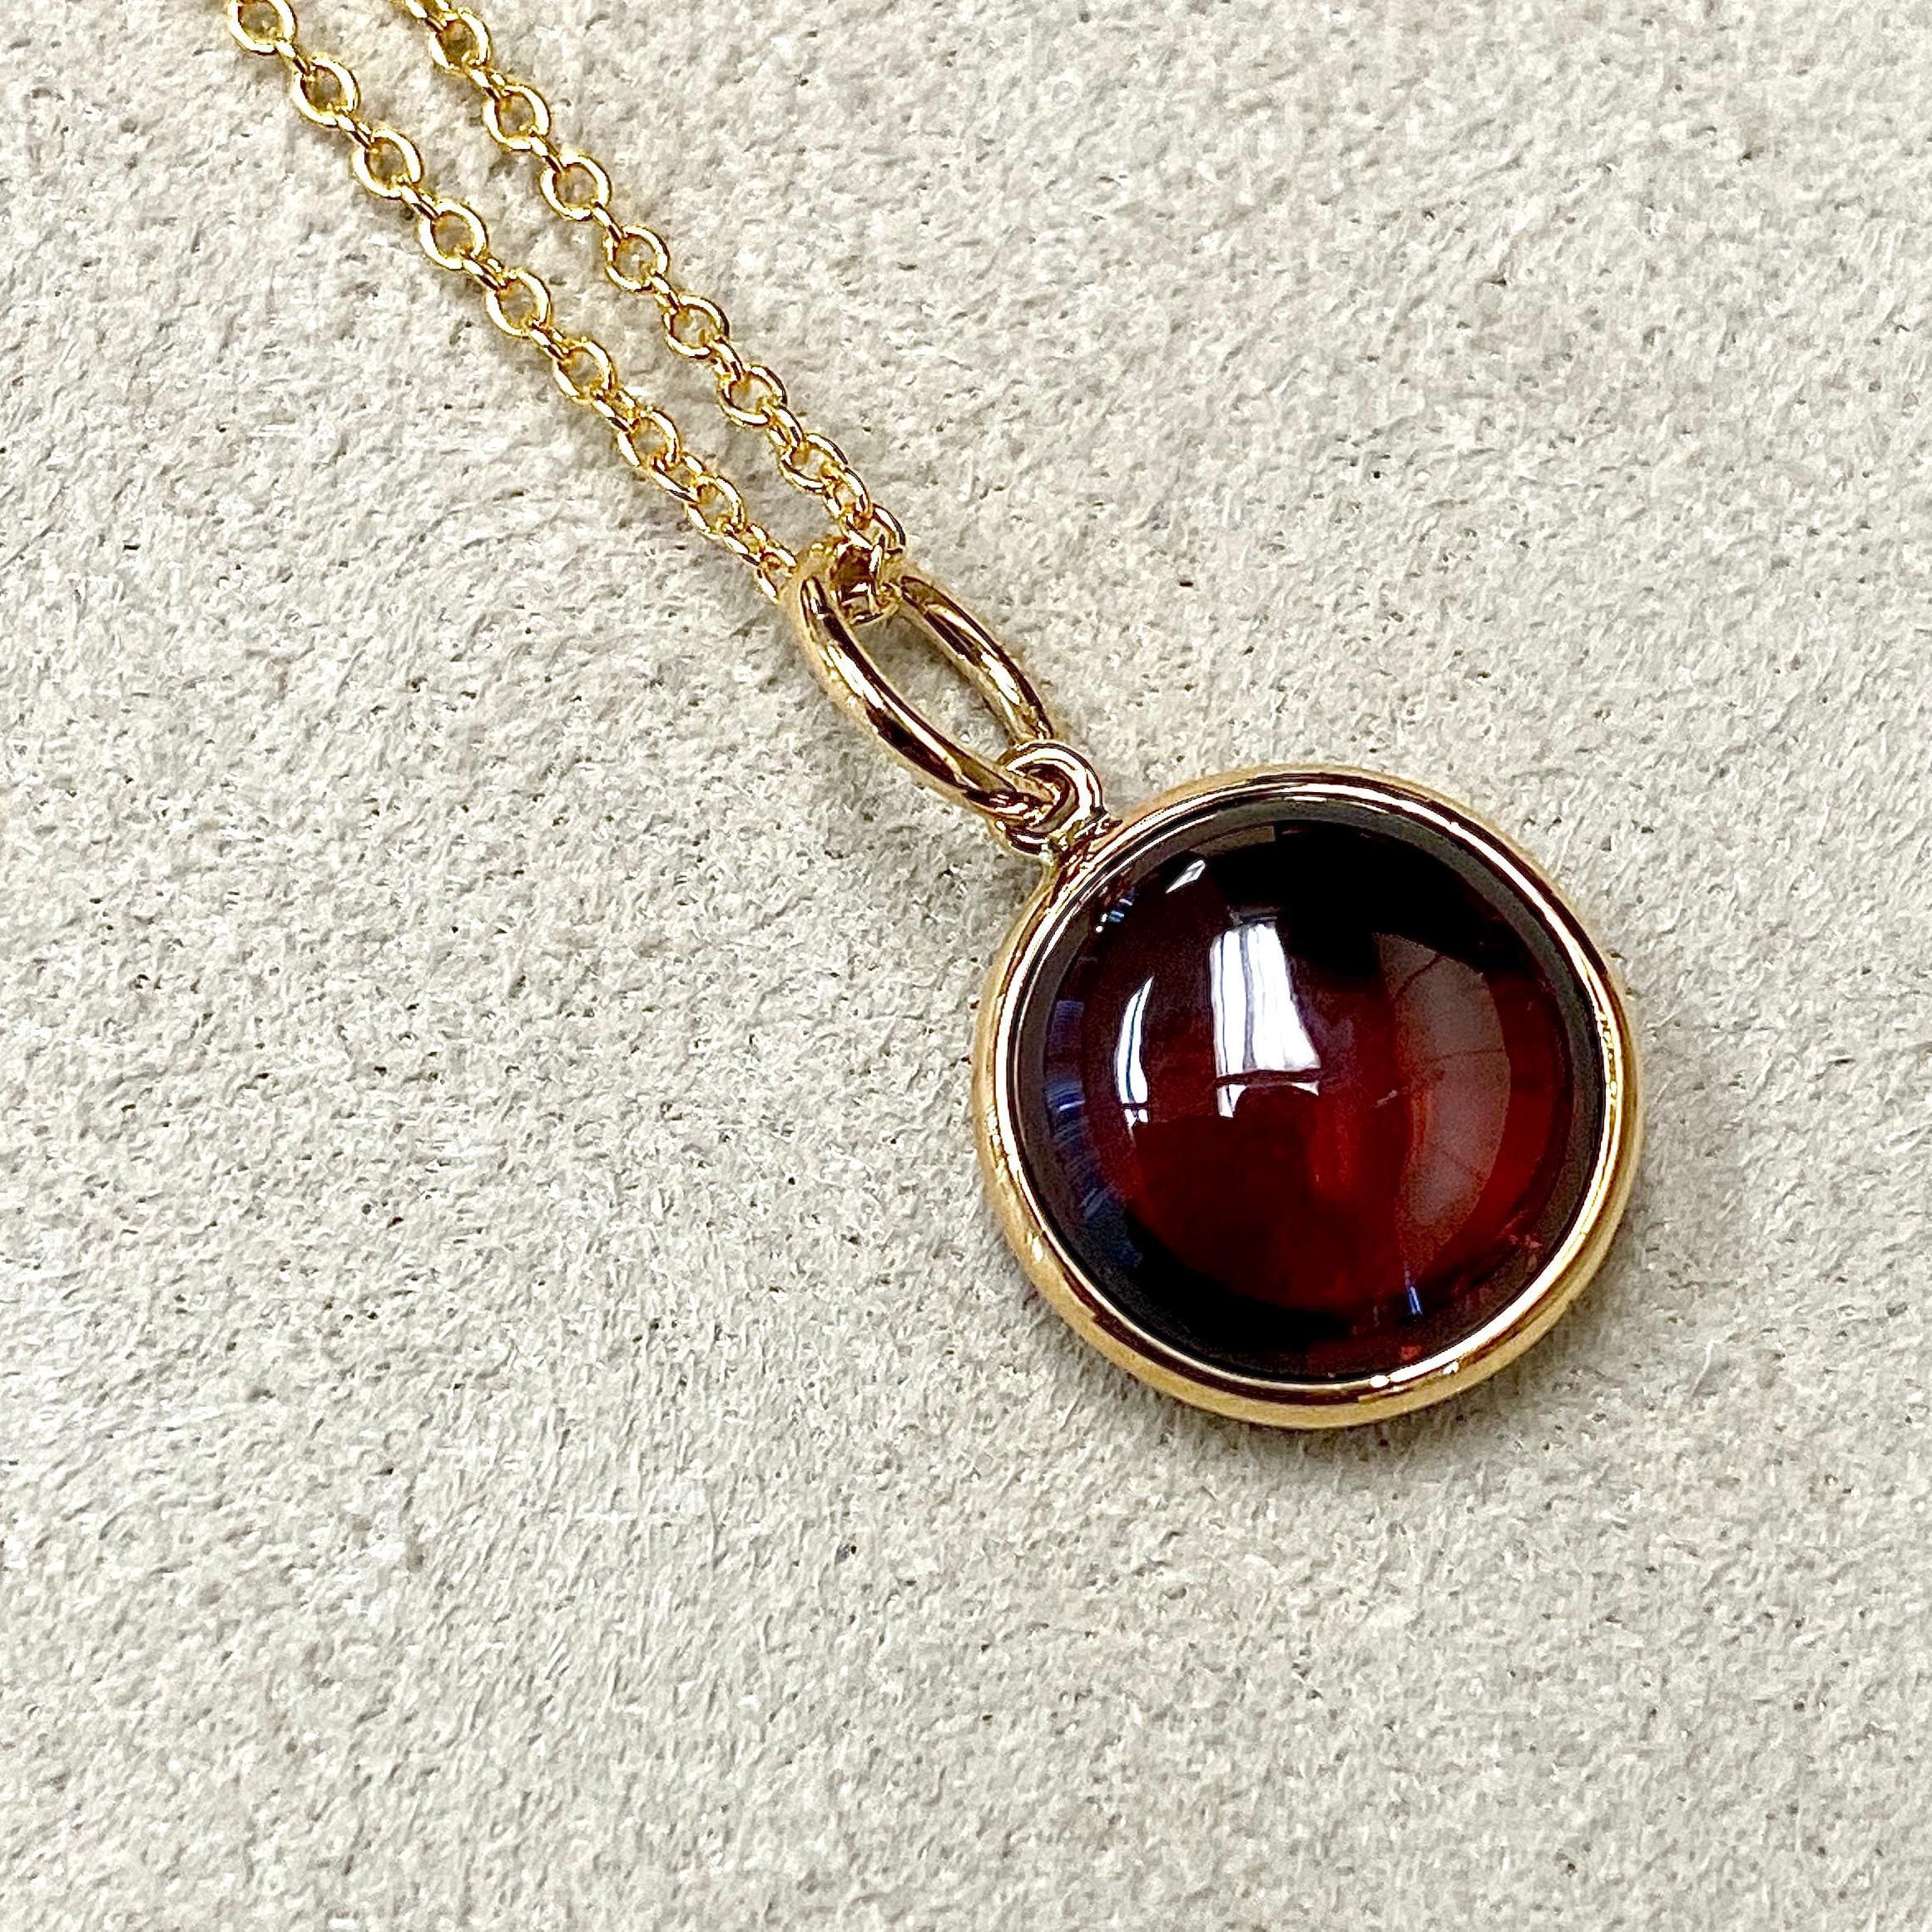 Created in 18 karat yellow gold
10 mm size charm
Rhodolite Garnet 3.5 cts approx
January Birthstone
Chain sold separately 

Exquisitely crafted from 18 karat yellow gold, this 10 mm pendant features a resplendent Rhodolite Garnet estimated at 3.5